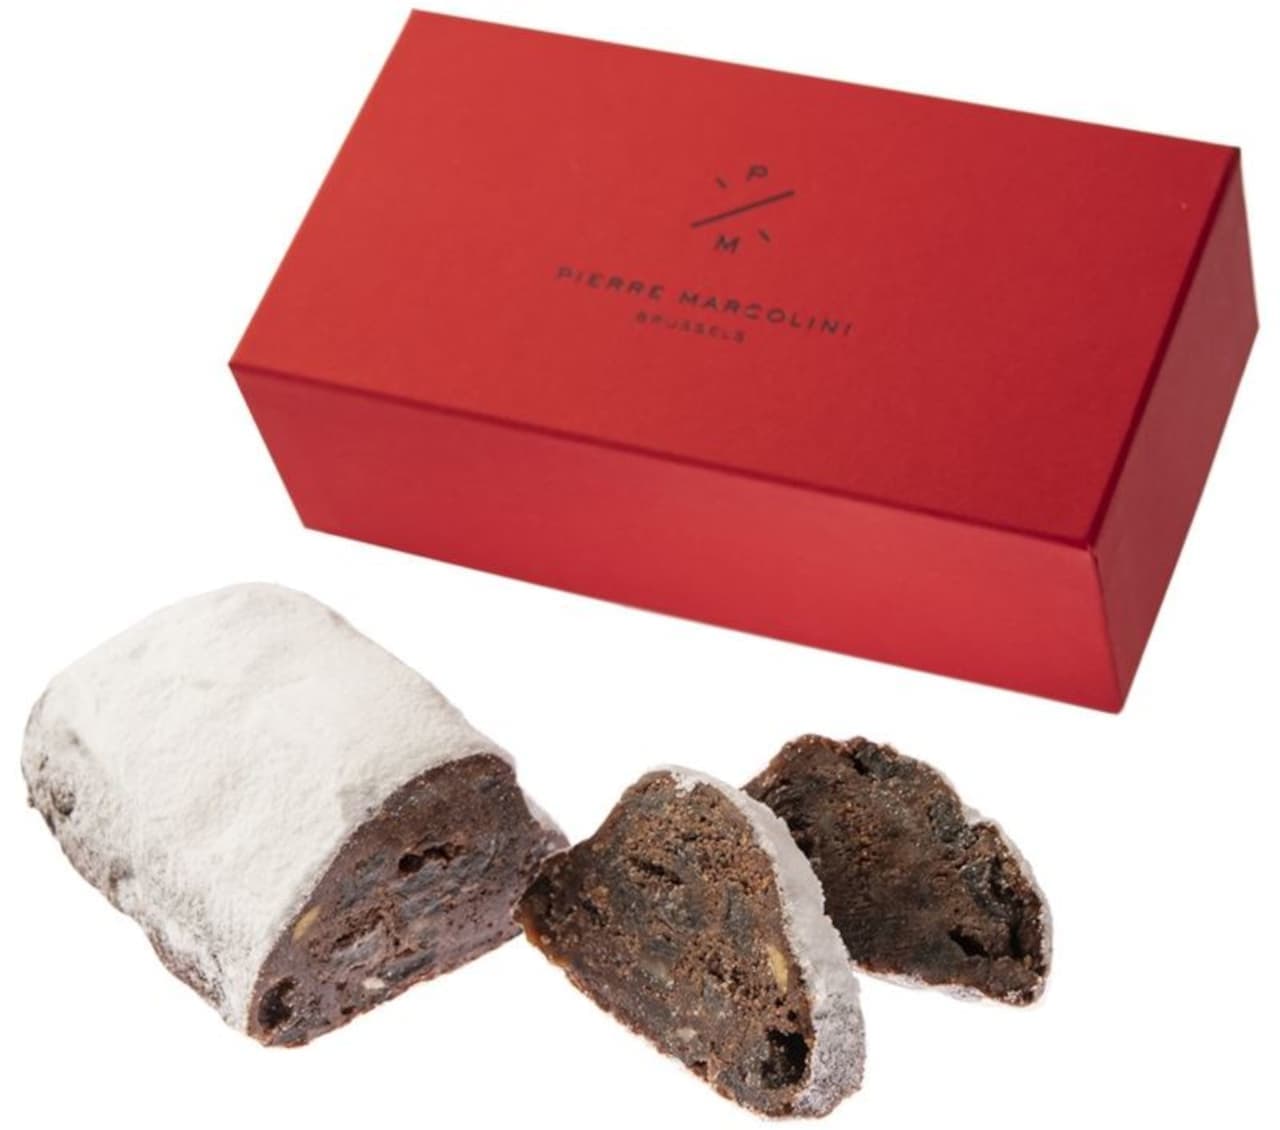 Pierre Marcolini with "Christmas Collection" and "Stollen" with cacao